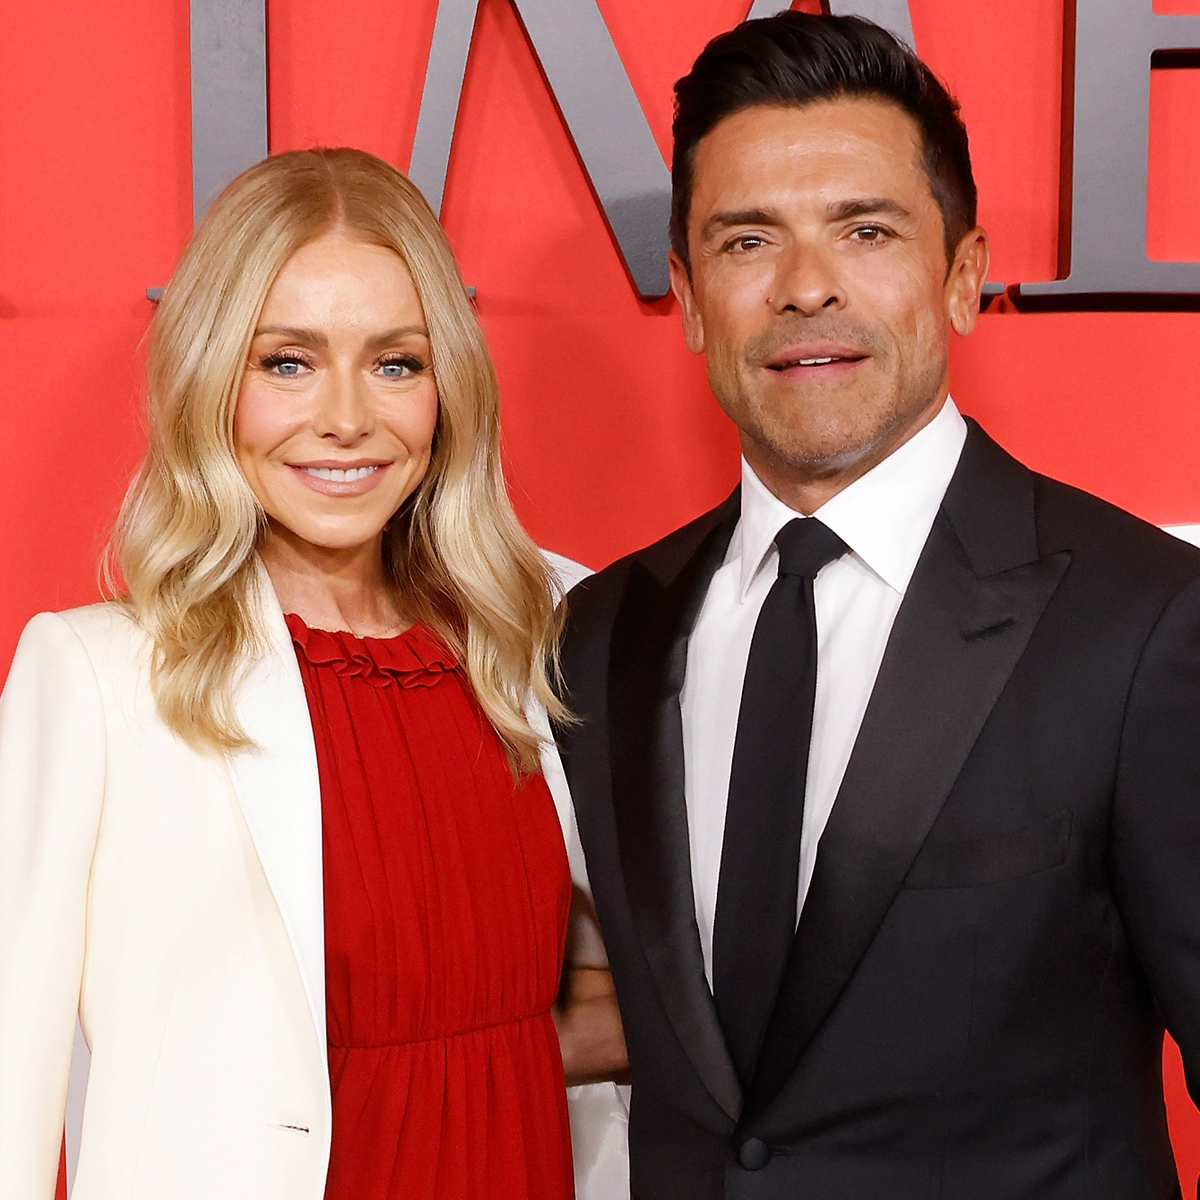 Mark Consuelos Confesses to Kelly Ripa That He Recently Kissed Another Woman